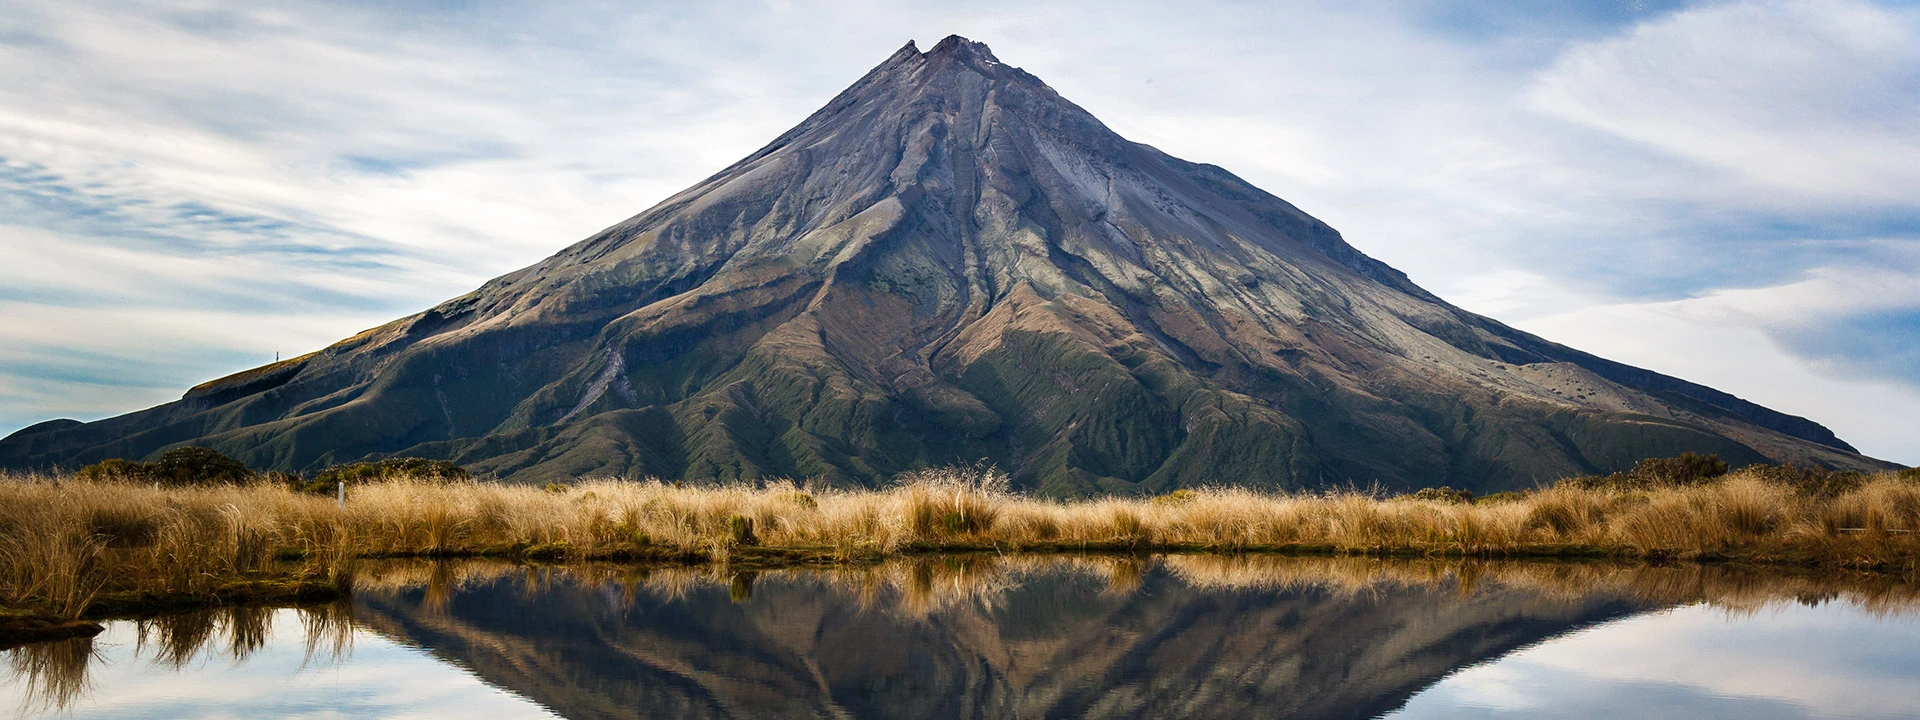 Mount Taranaki volcano in New Zealand on an Australasia and South Pacific cruise